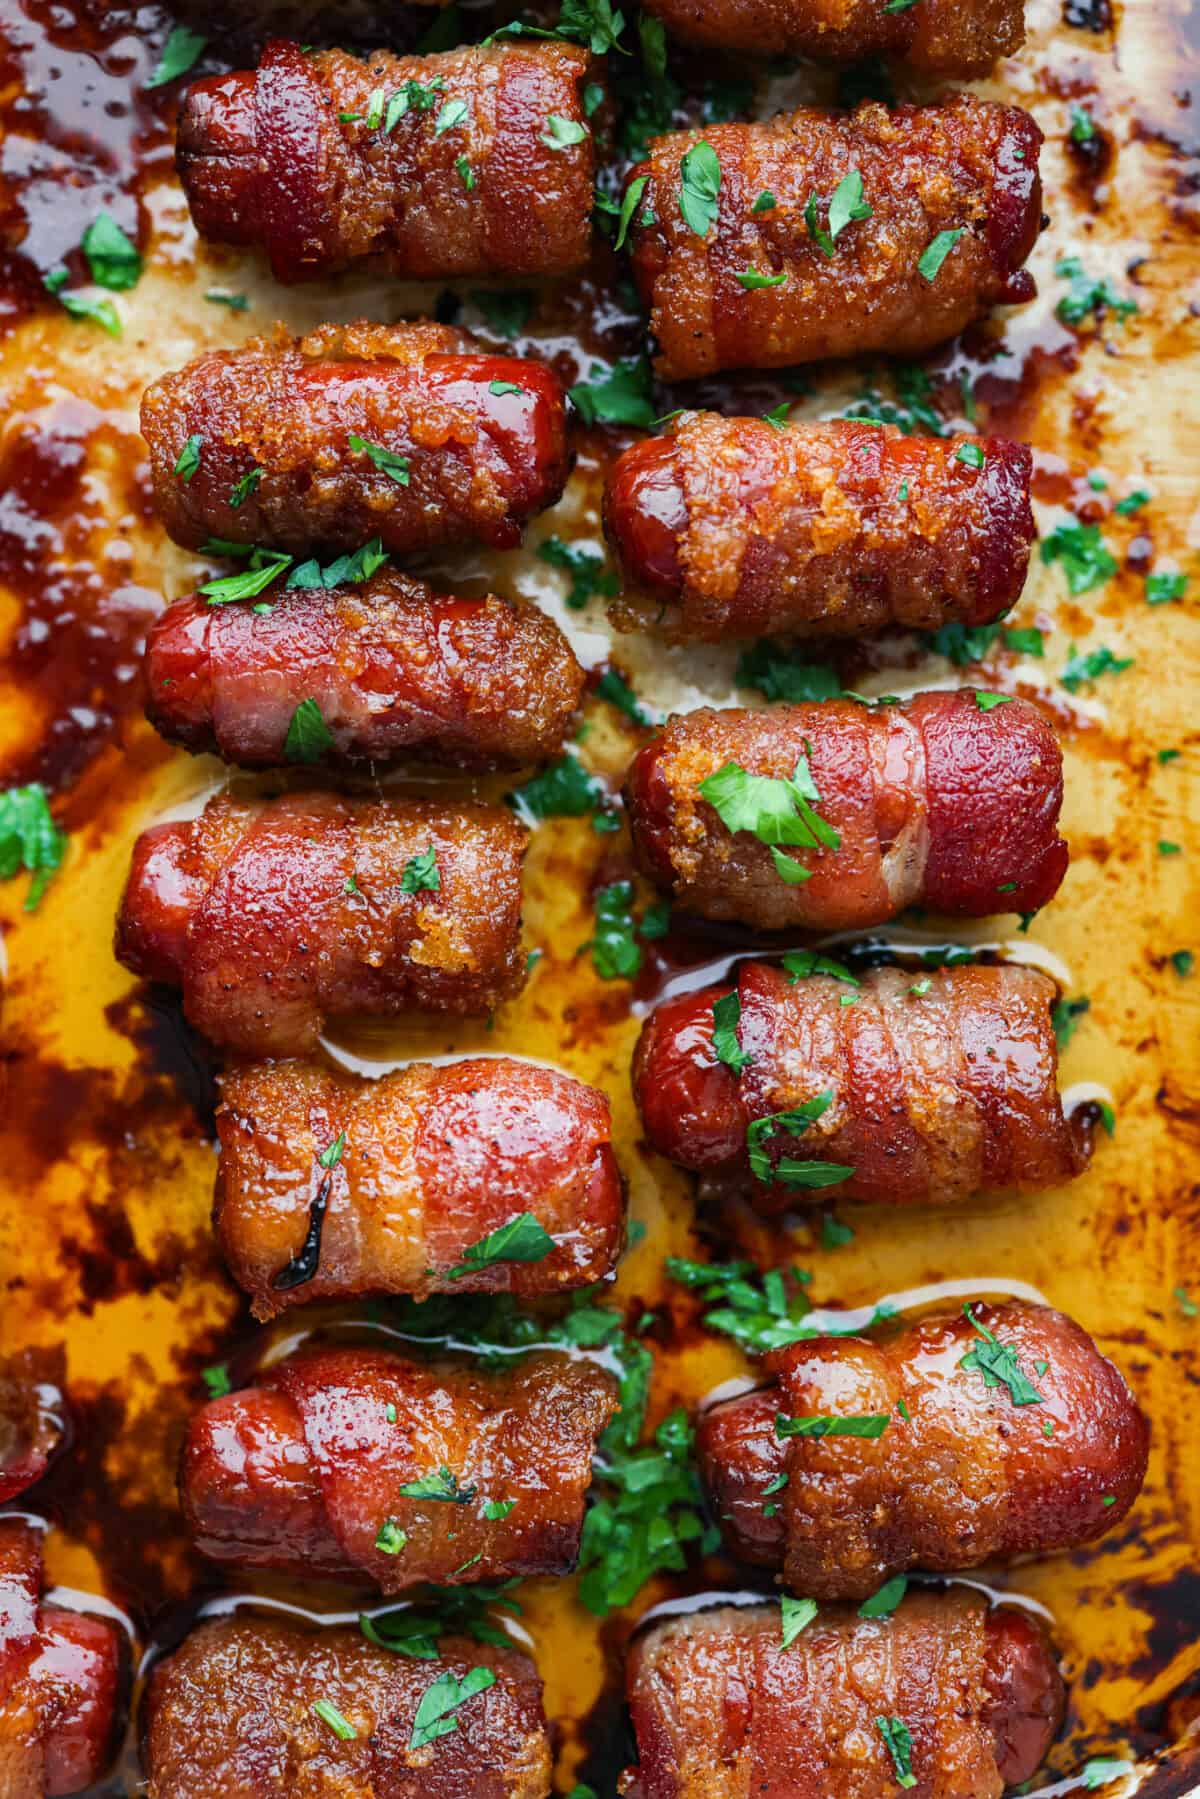 Top view of bacon wrapped smokies in a baking dish.